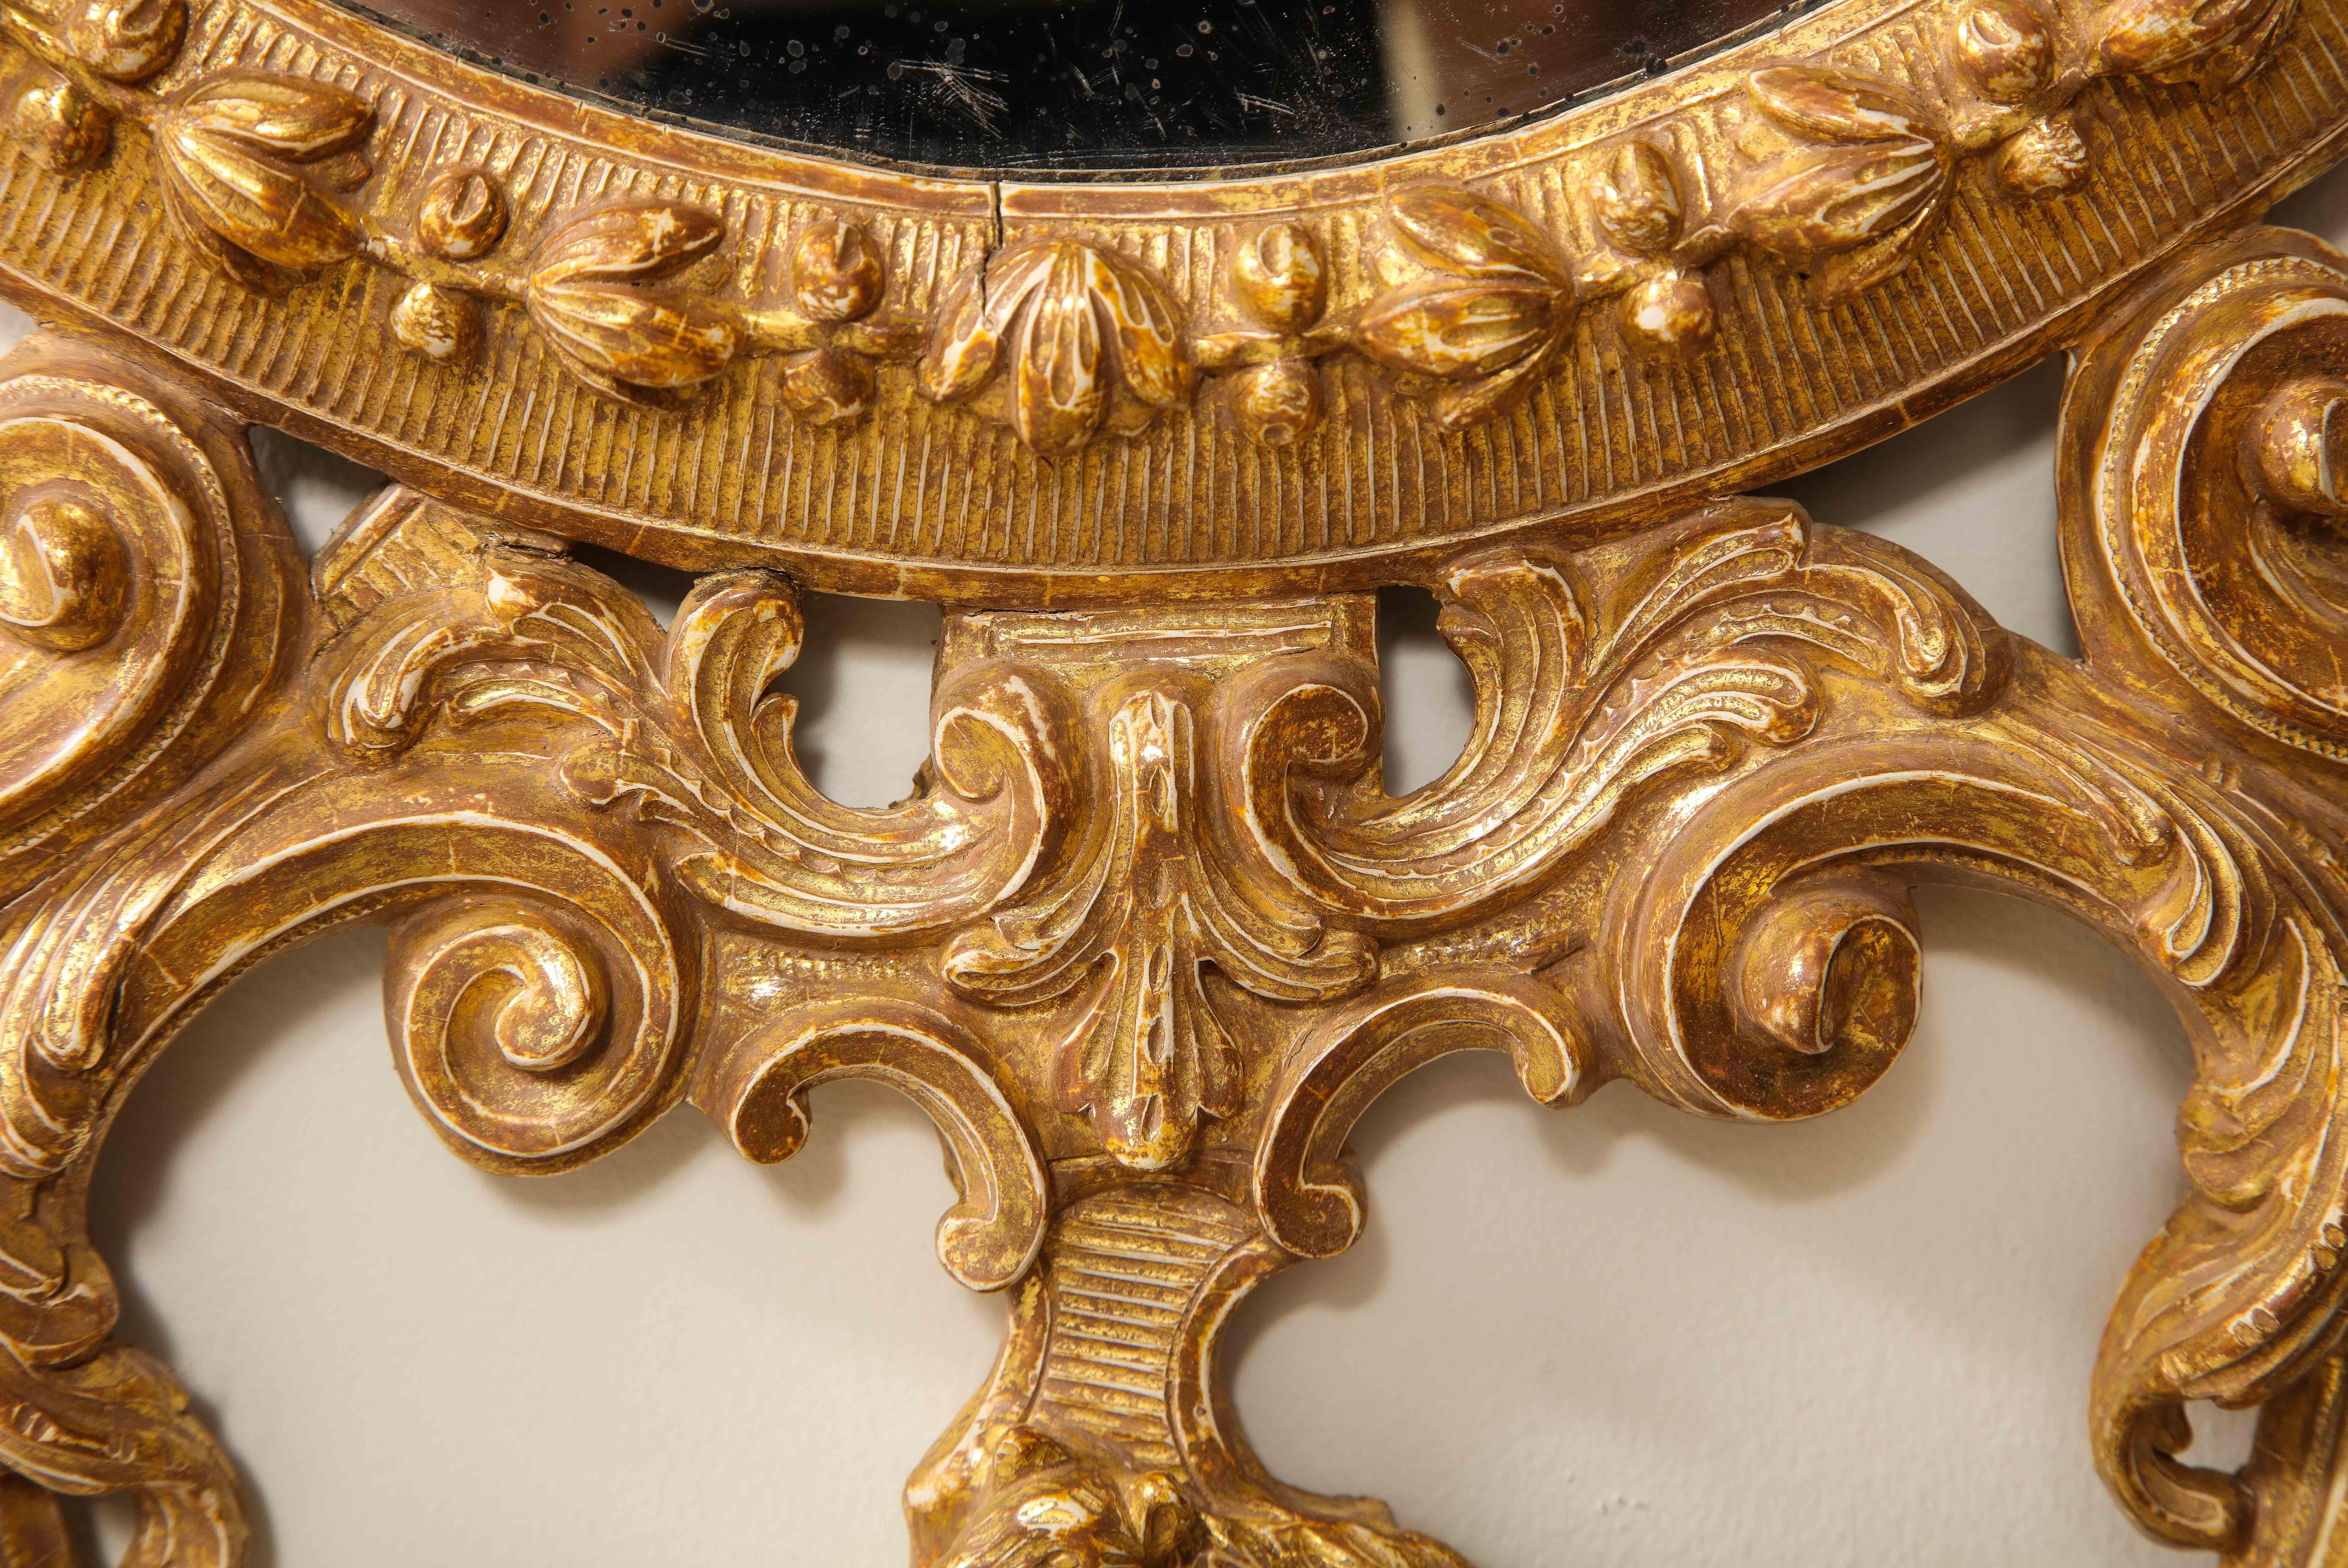 Pr. George III Gilt Carton-Pierre and Giltwood Oval Mirrors, Manner John Linnell For Sale 5